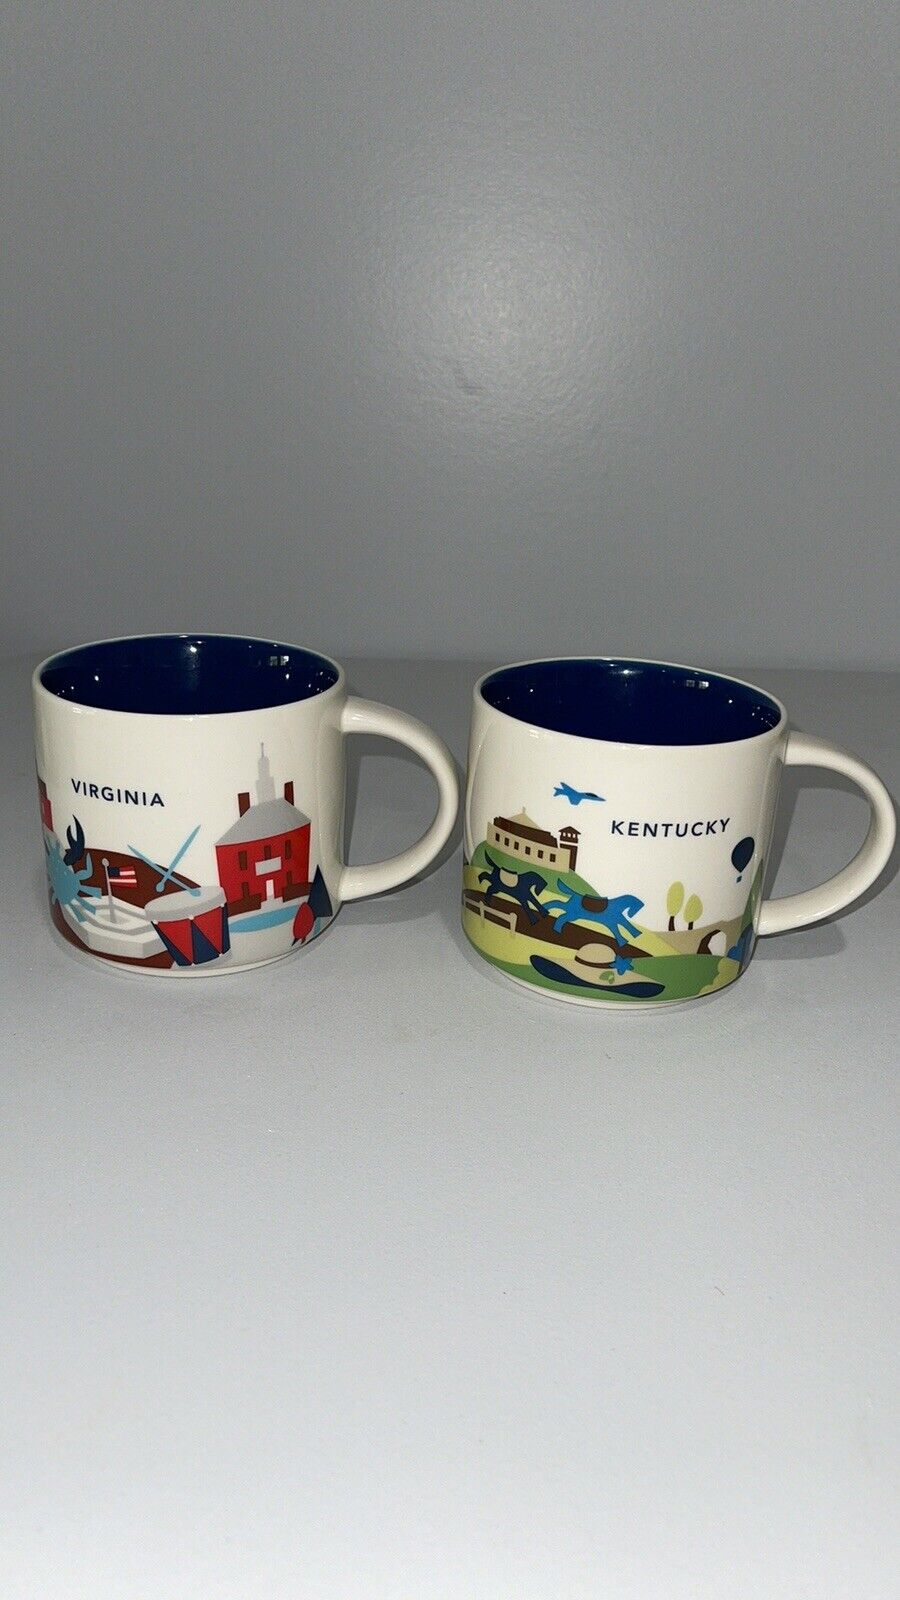 Starbucks Virginia and Kentucky mugs You are Here 2015 Collection